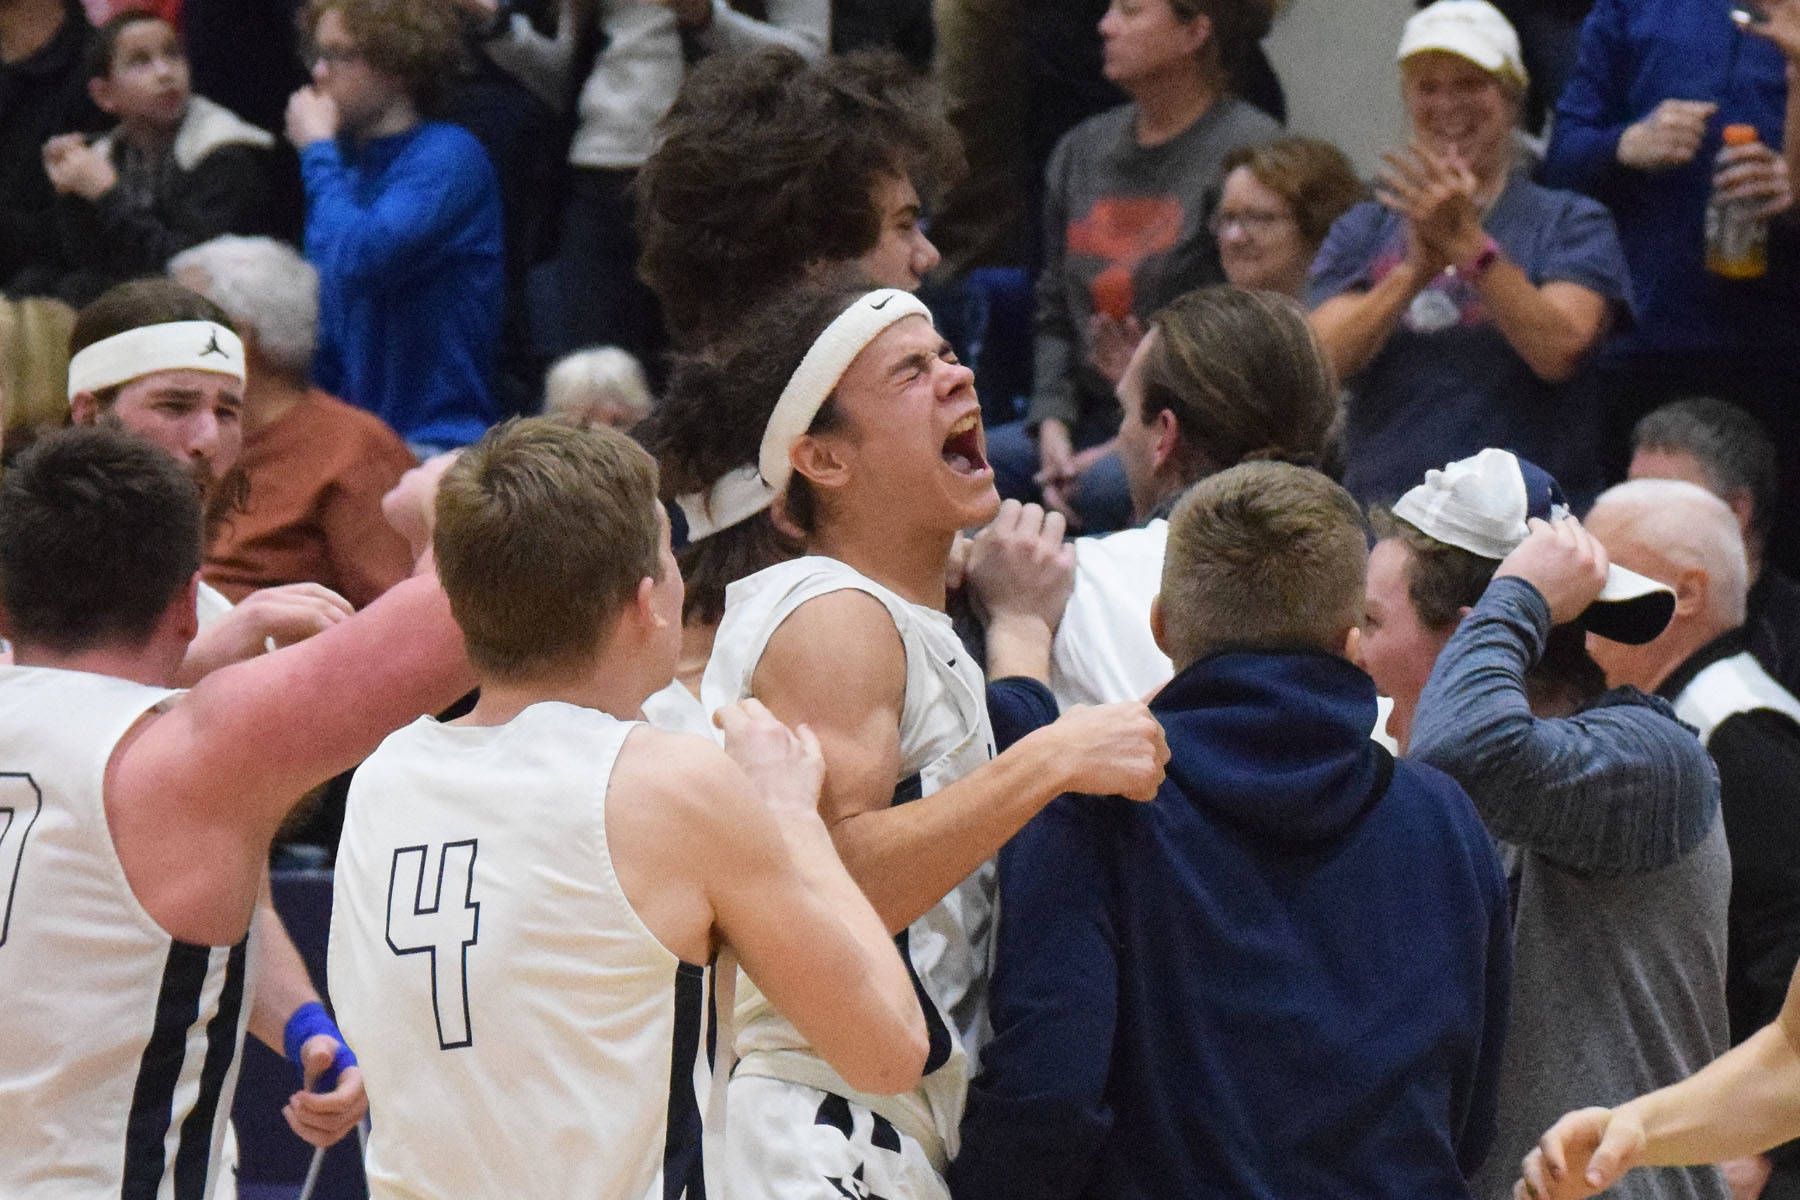 Soldotna’s Mekhai Rich (middle) celebrates with teammates Friday night after a win over Wasilla in the Northern Lights Conference semifinals at Soldotna High School. (Photo by Joey Klecka/Peninsula Clarion)